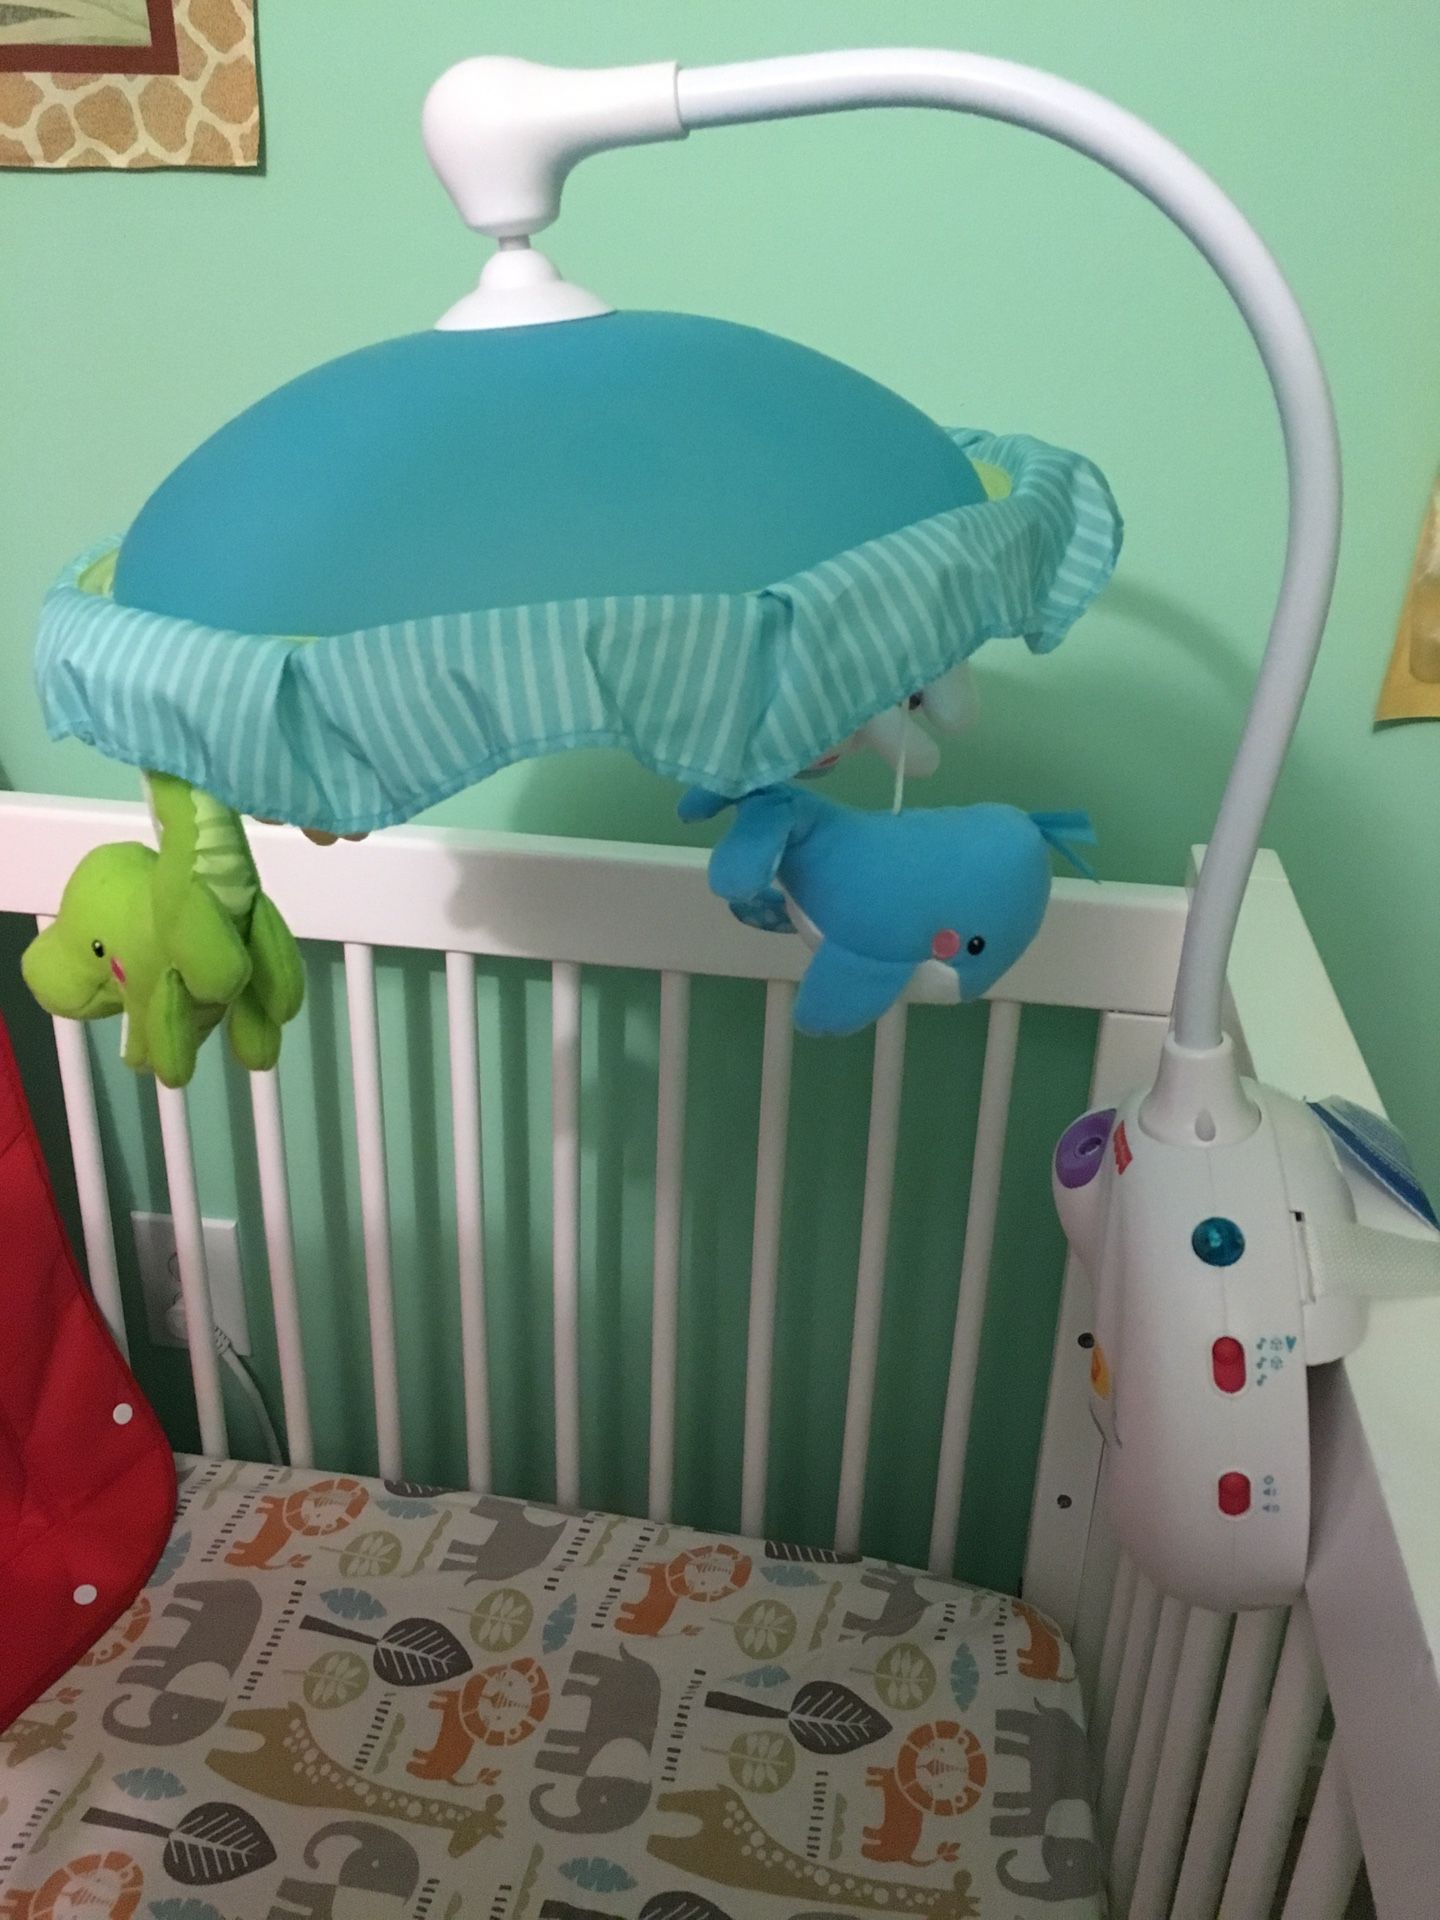 Crib mobile with music and lights - gently used!